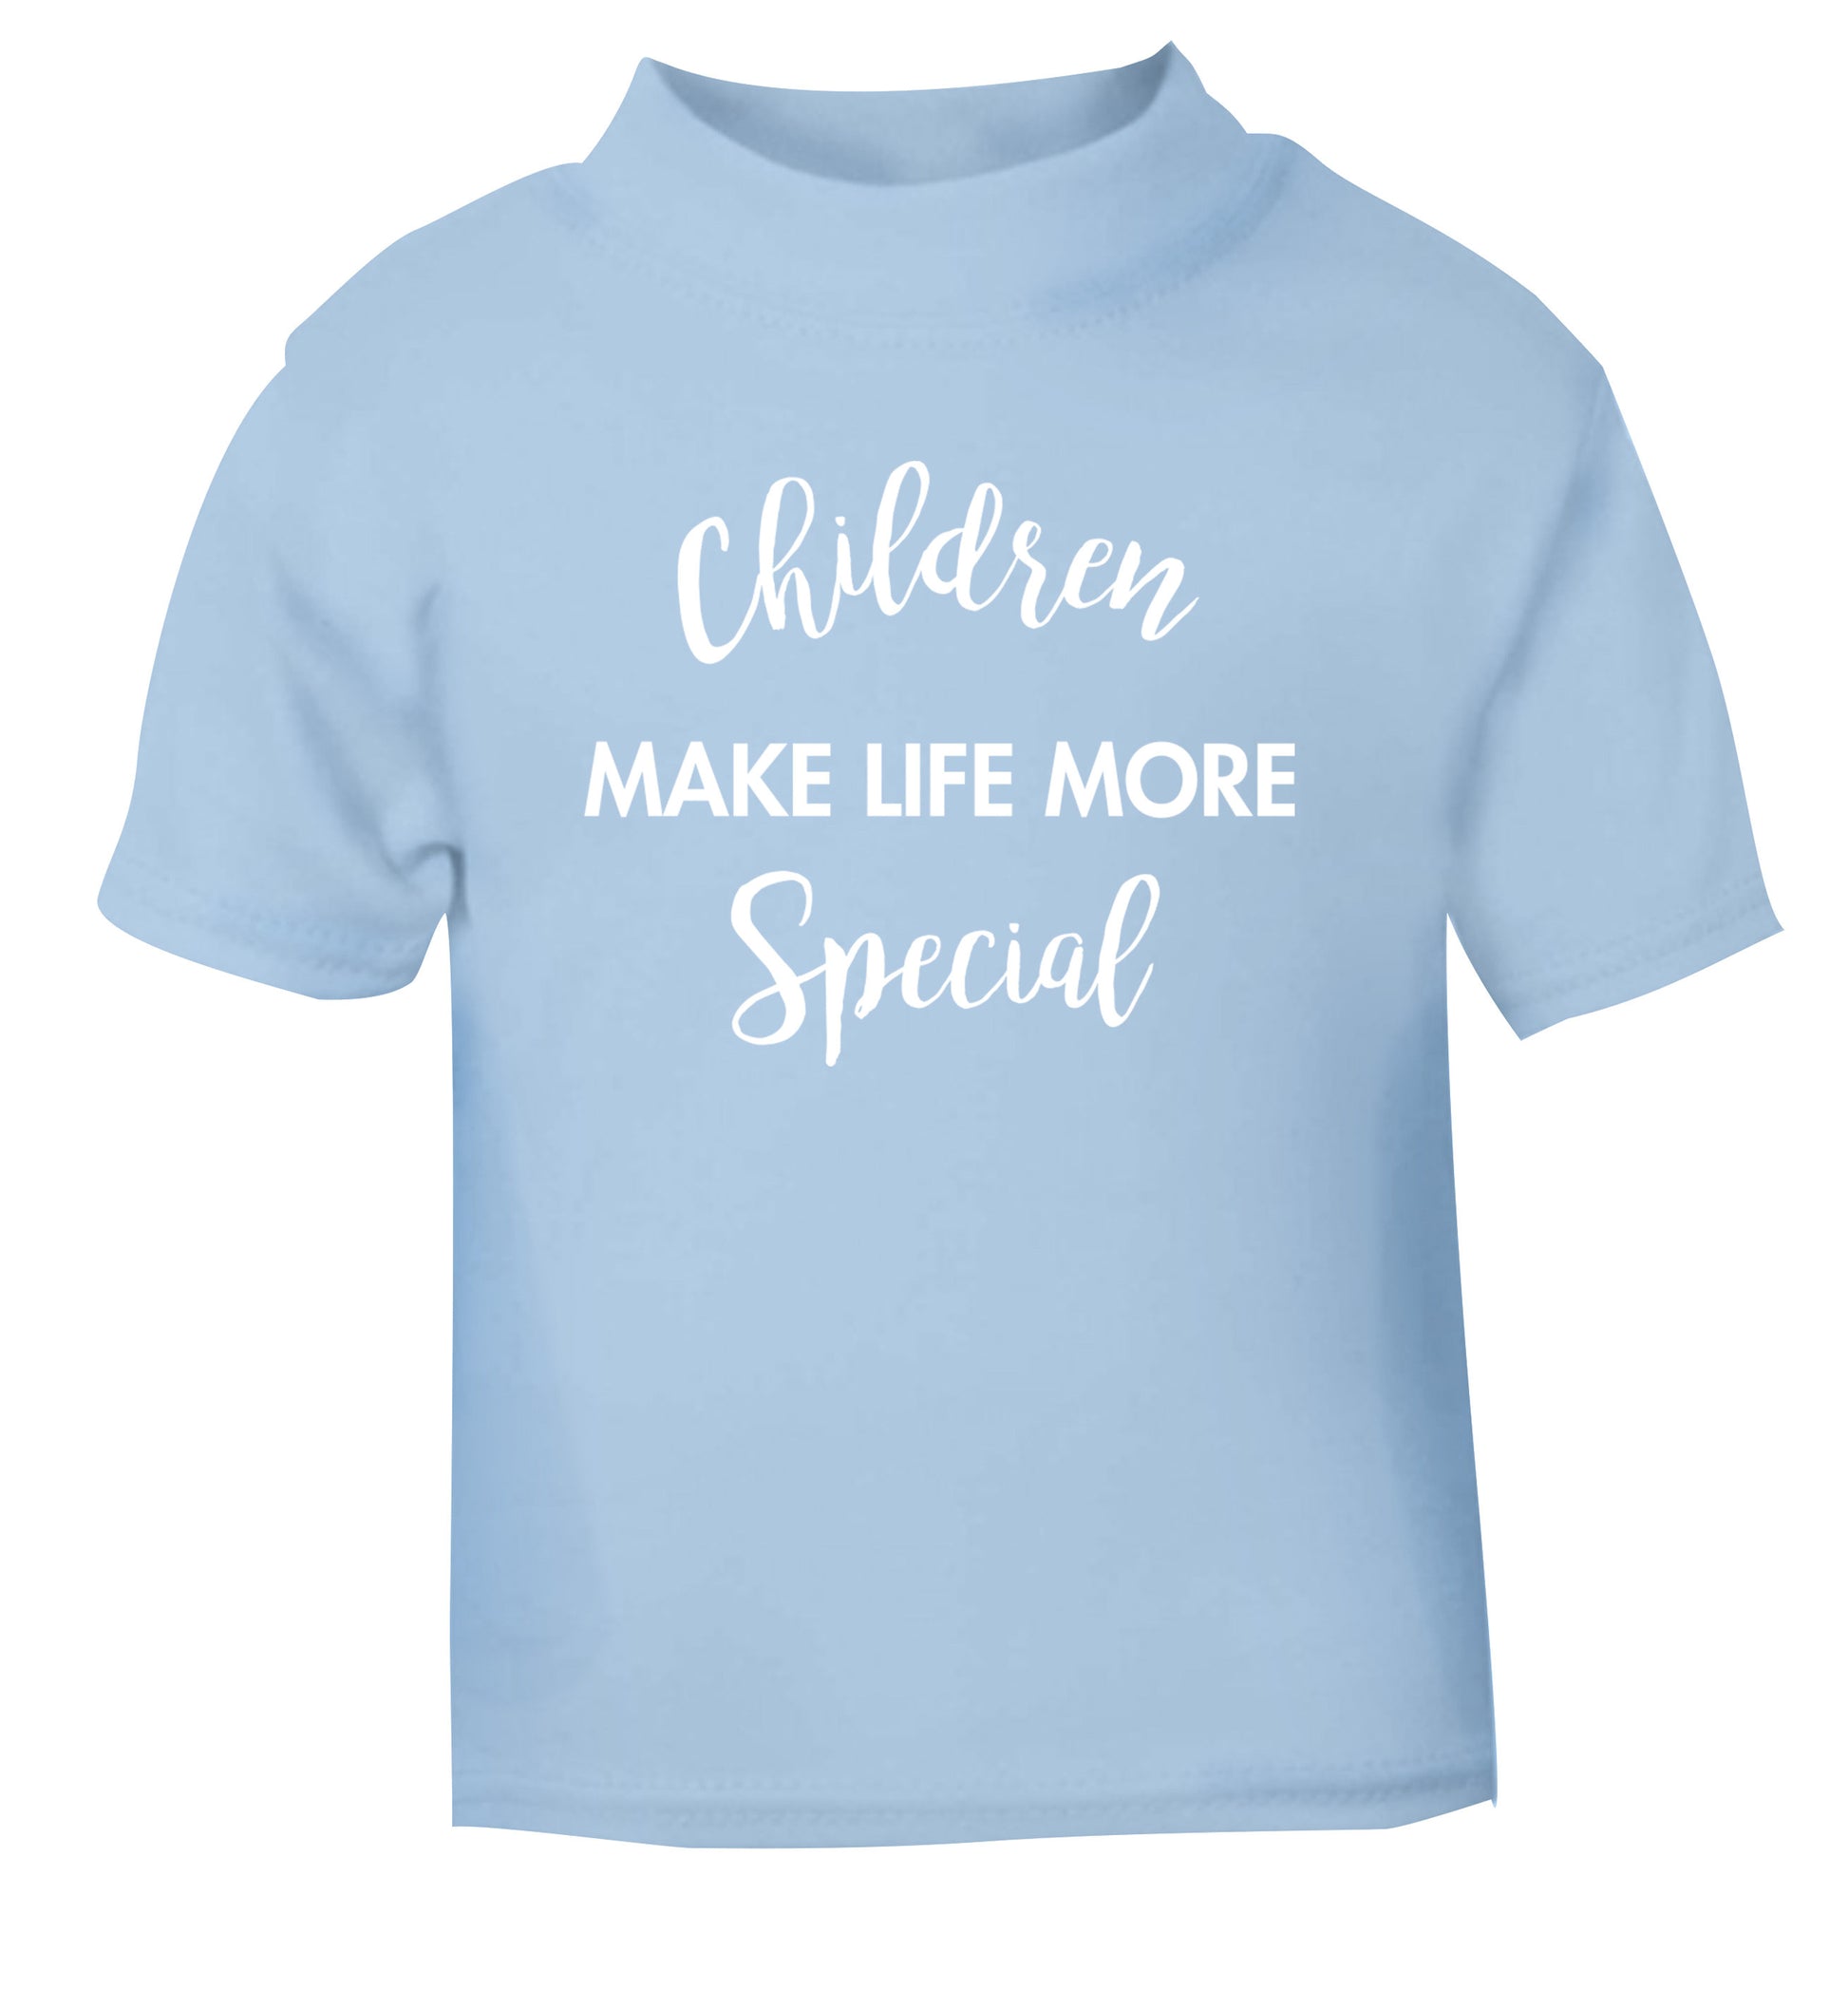 Children make life more special light blue Baby Toddler Tshirt 2 Years